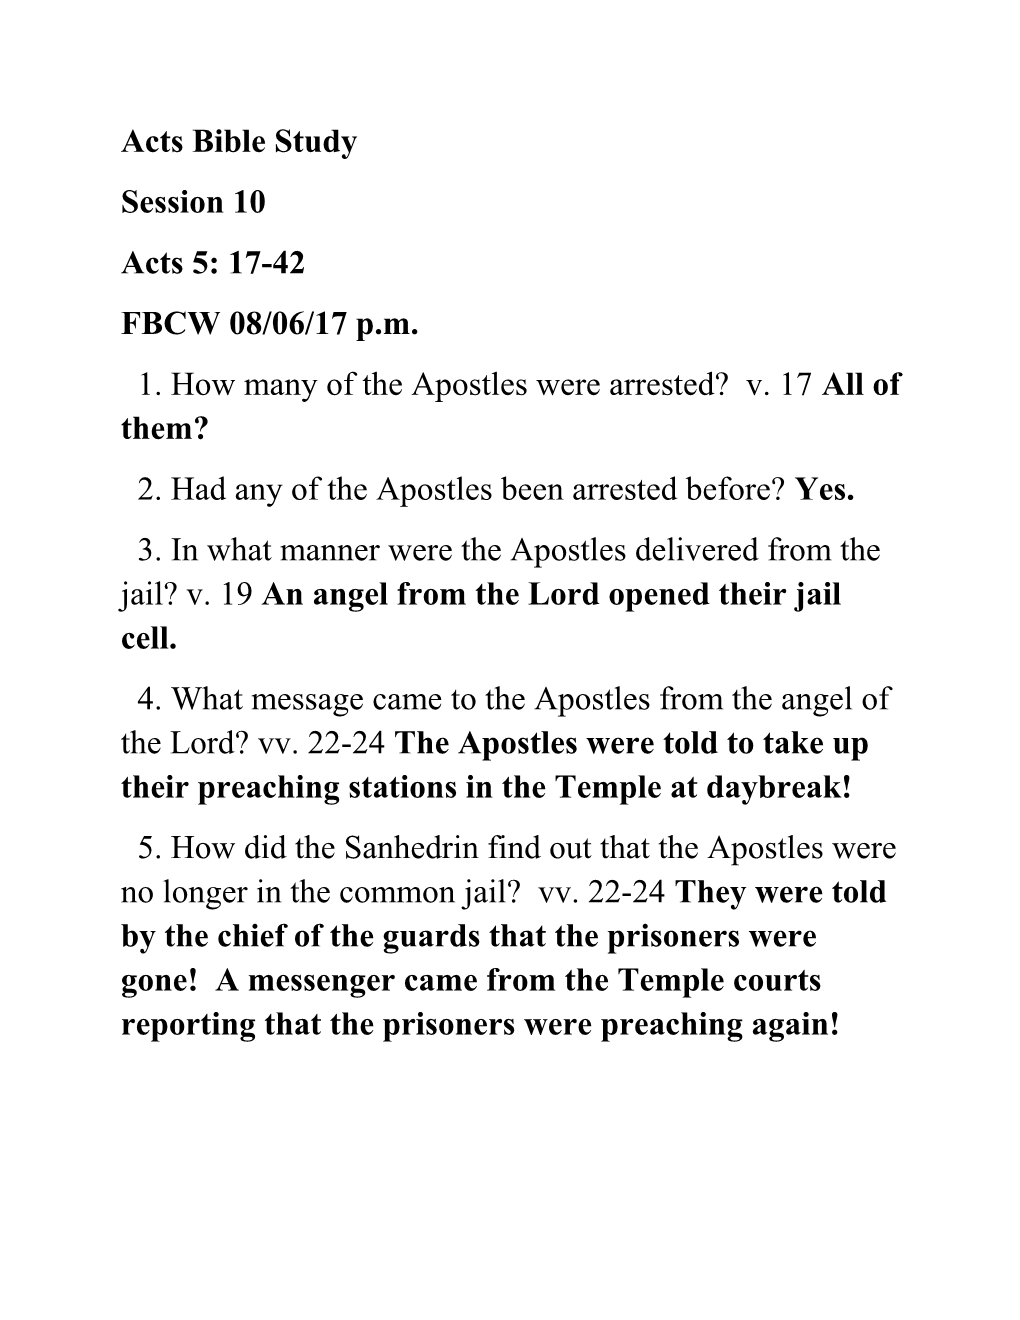 1. How Many of the Apostles Were Arrested? V. 17All of Them?